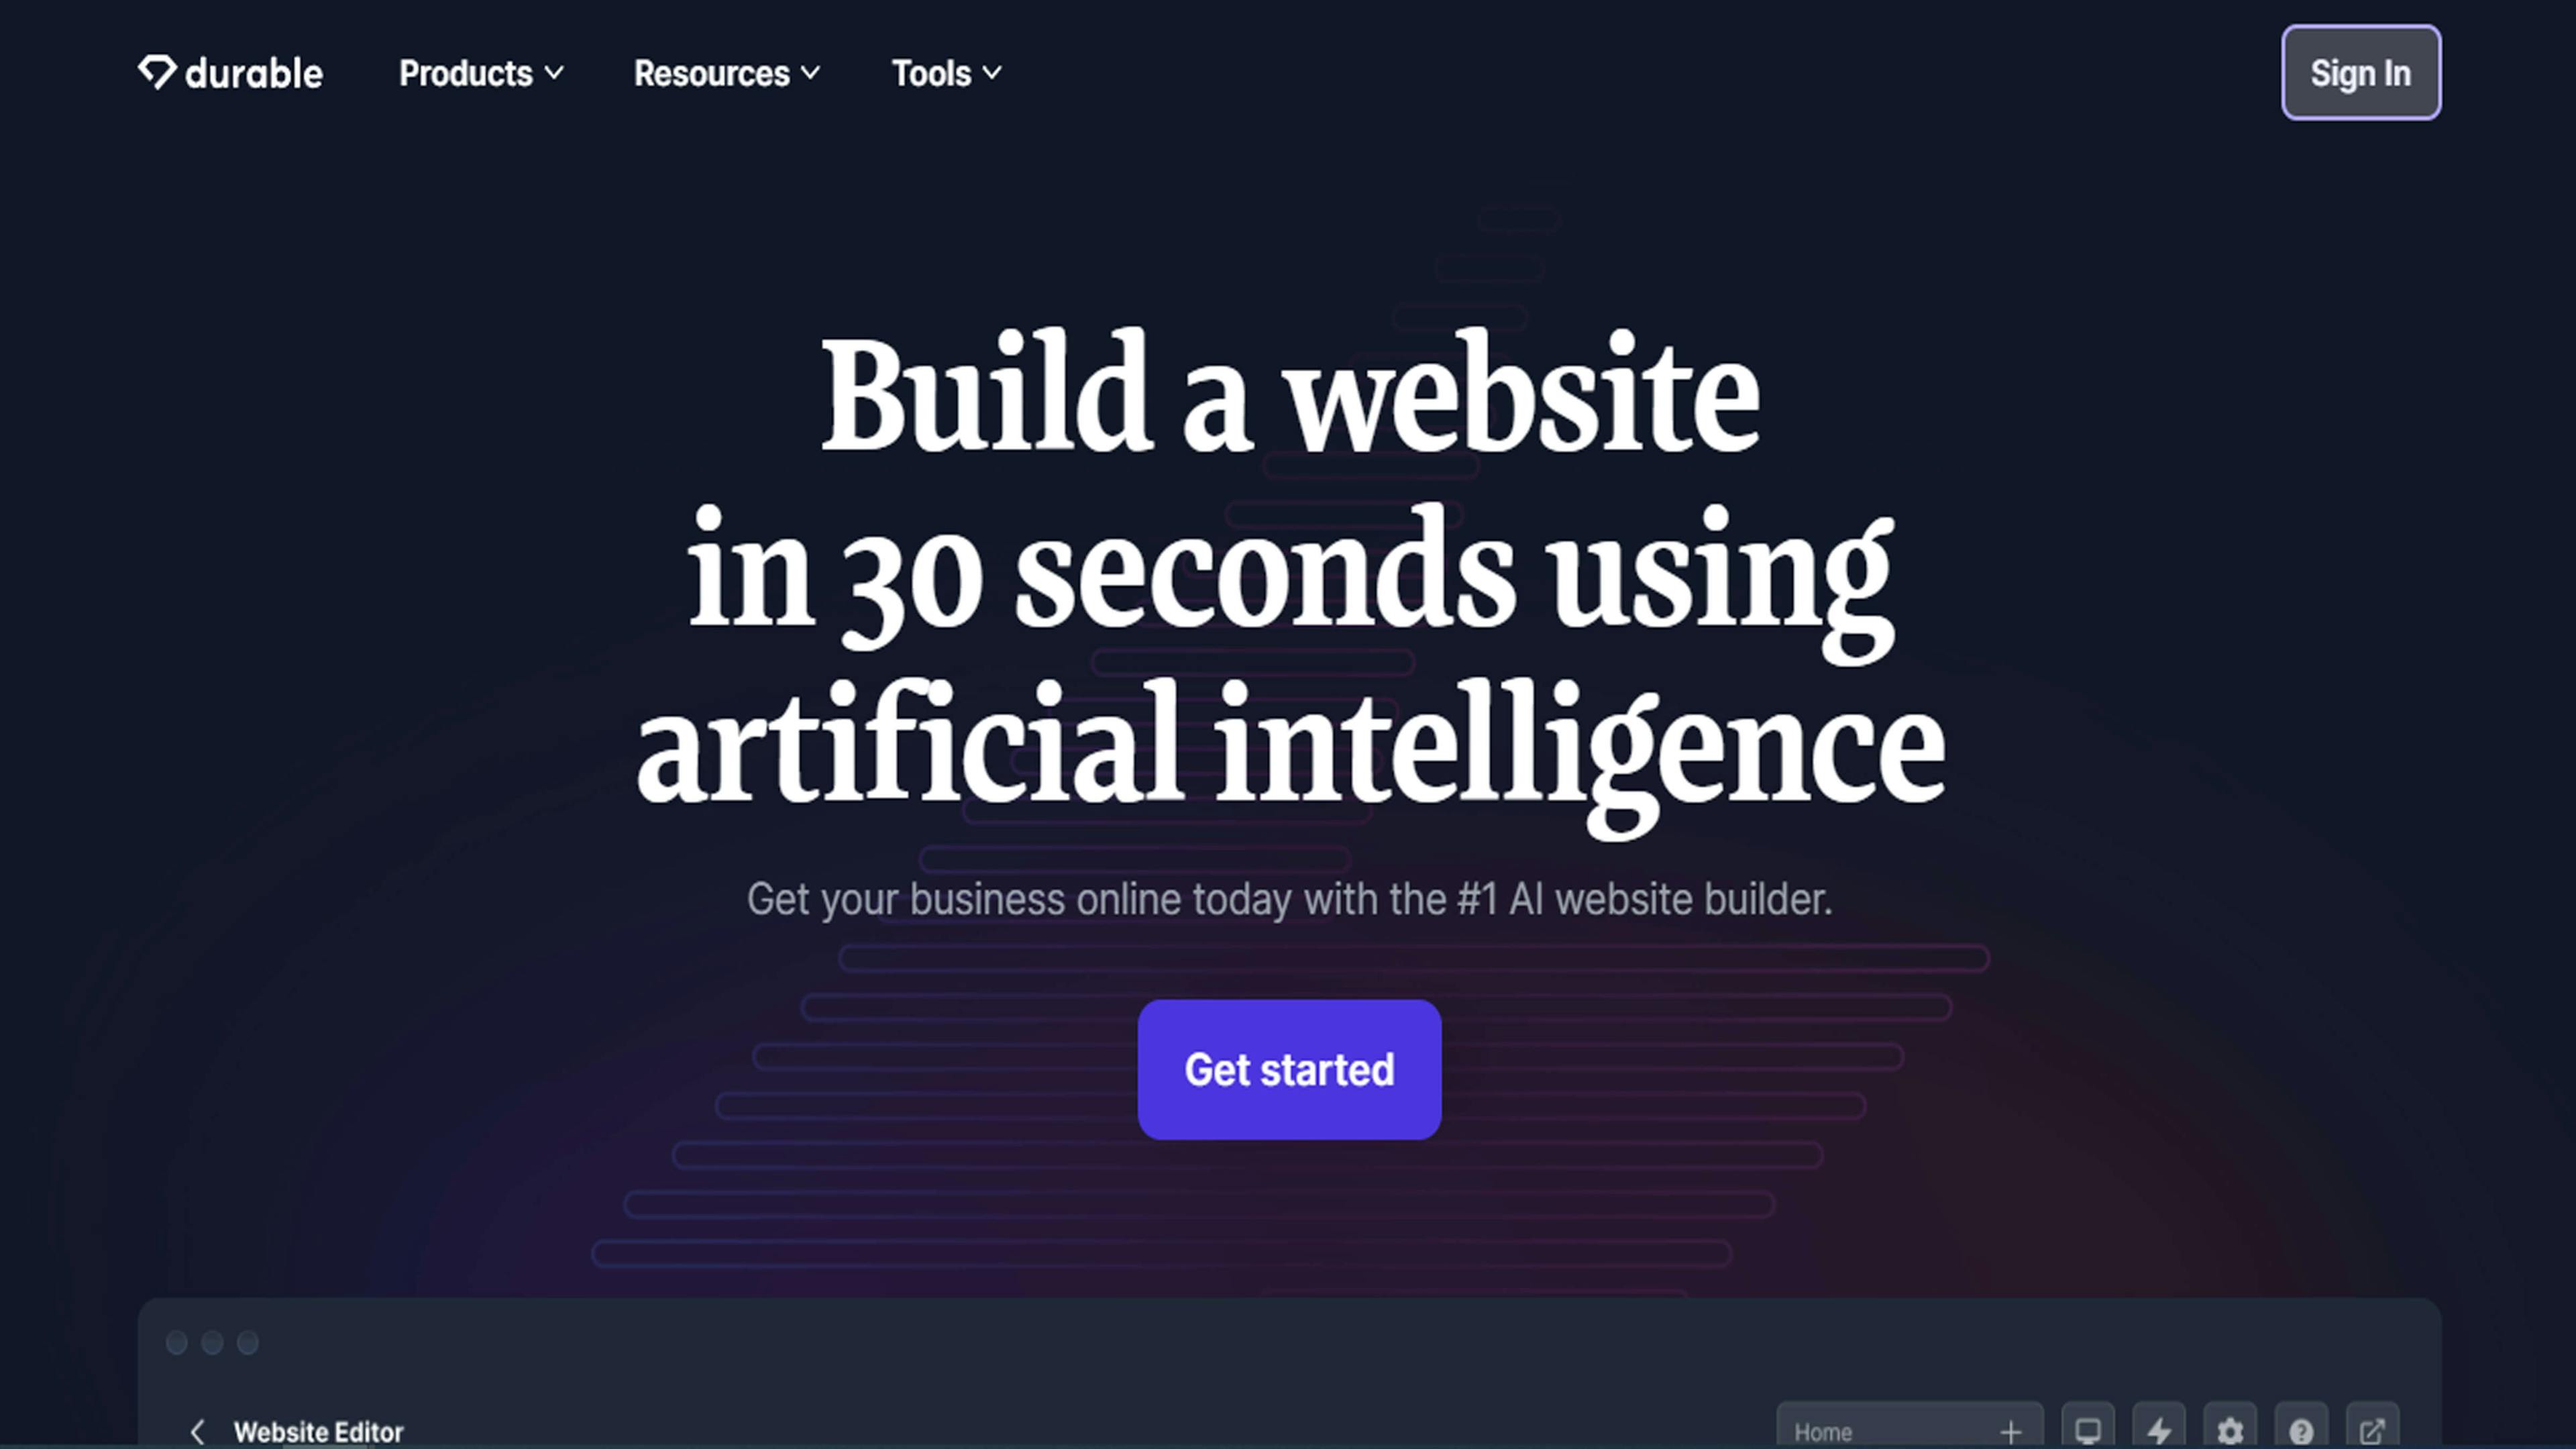 Build smart, fast, and easy - AI-powered websites now!